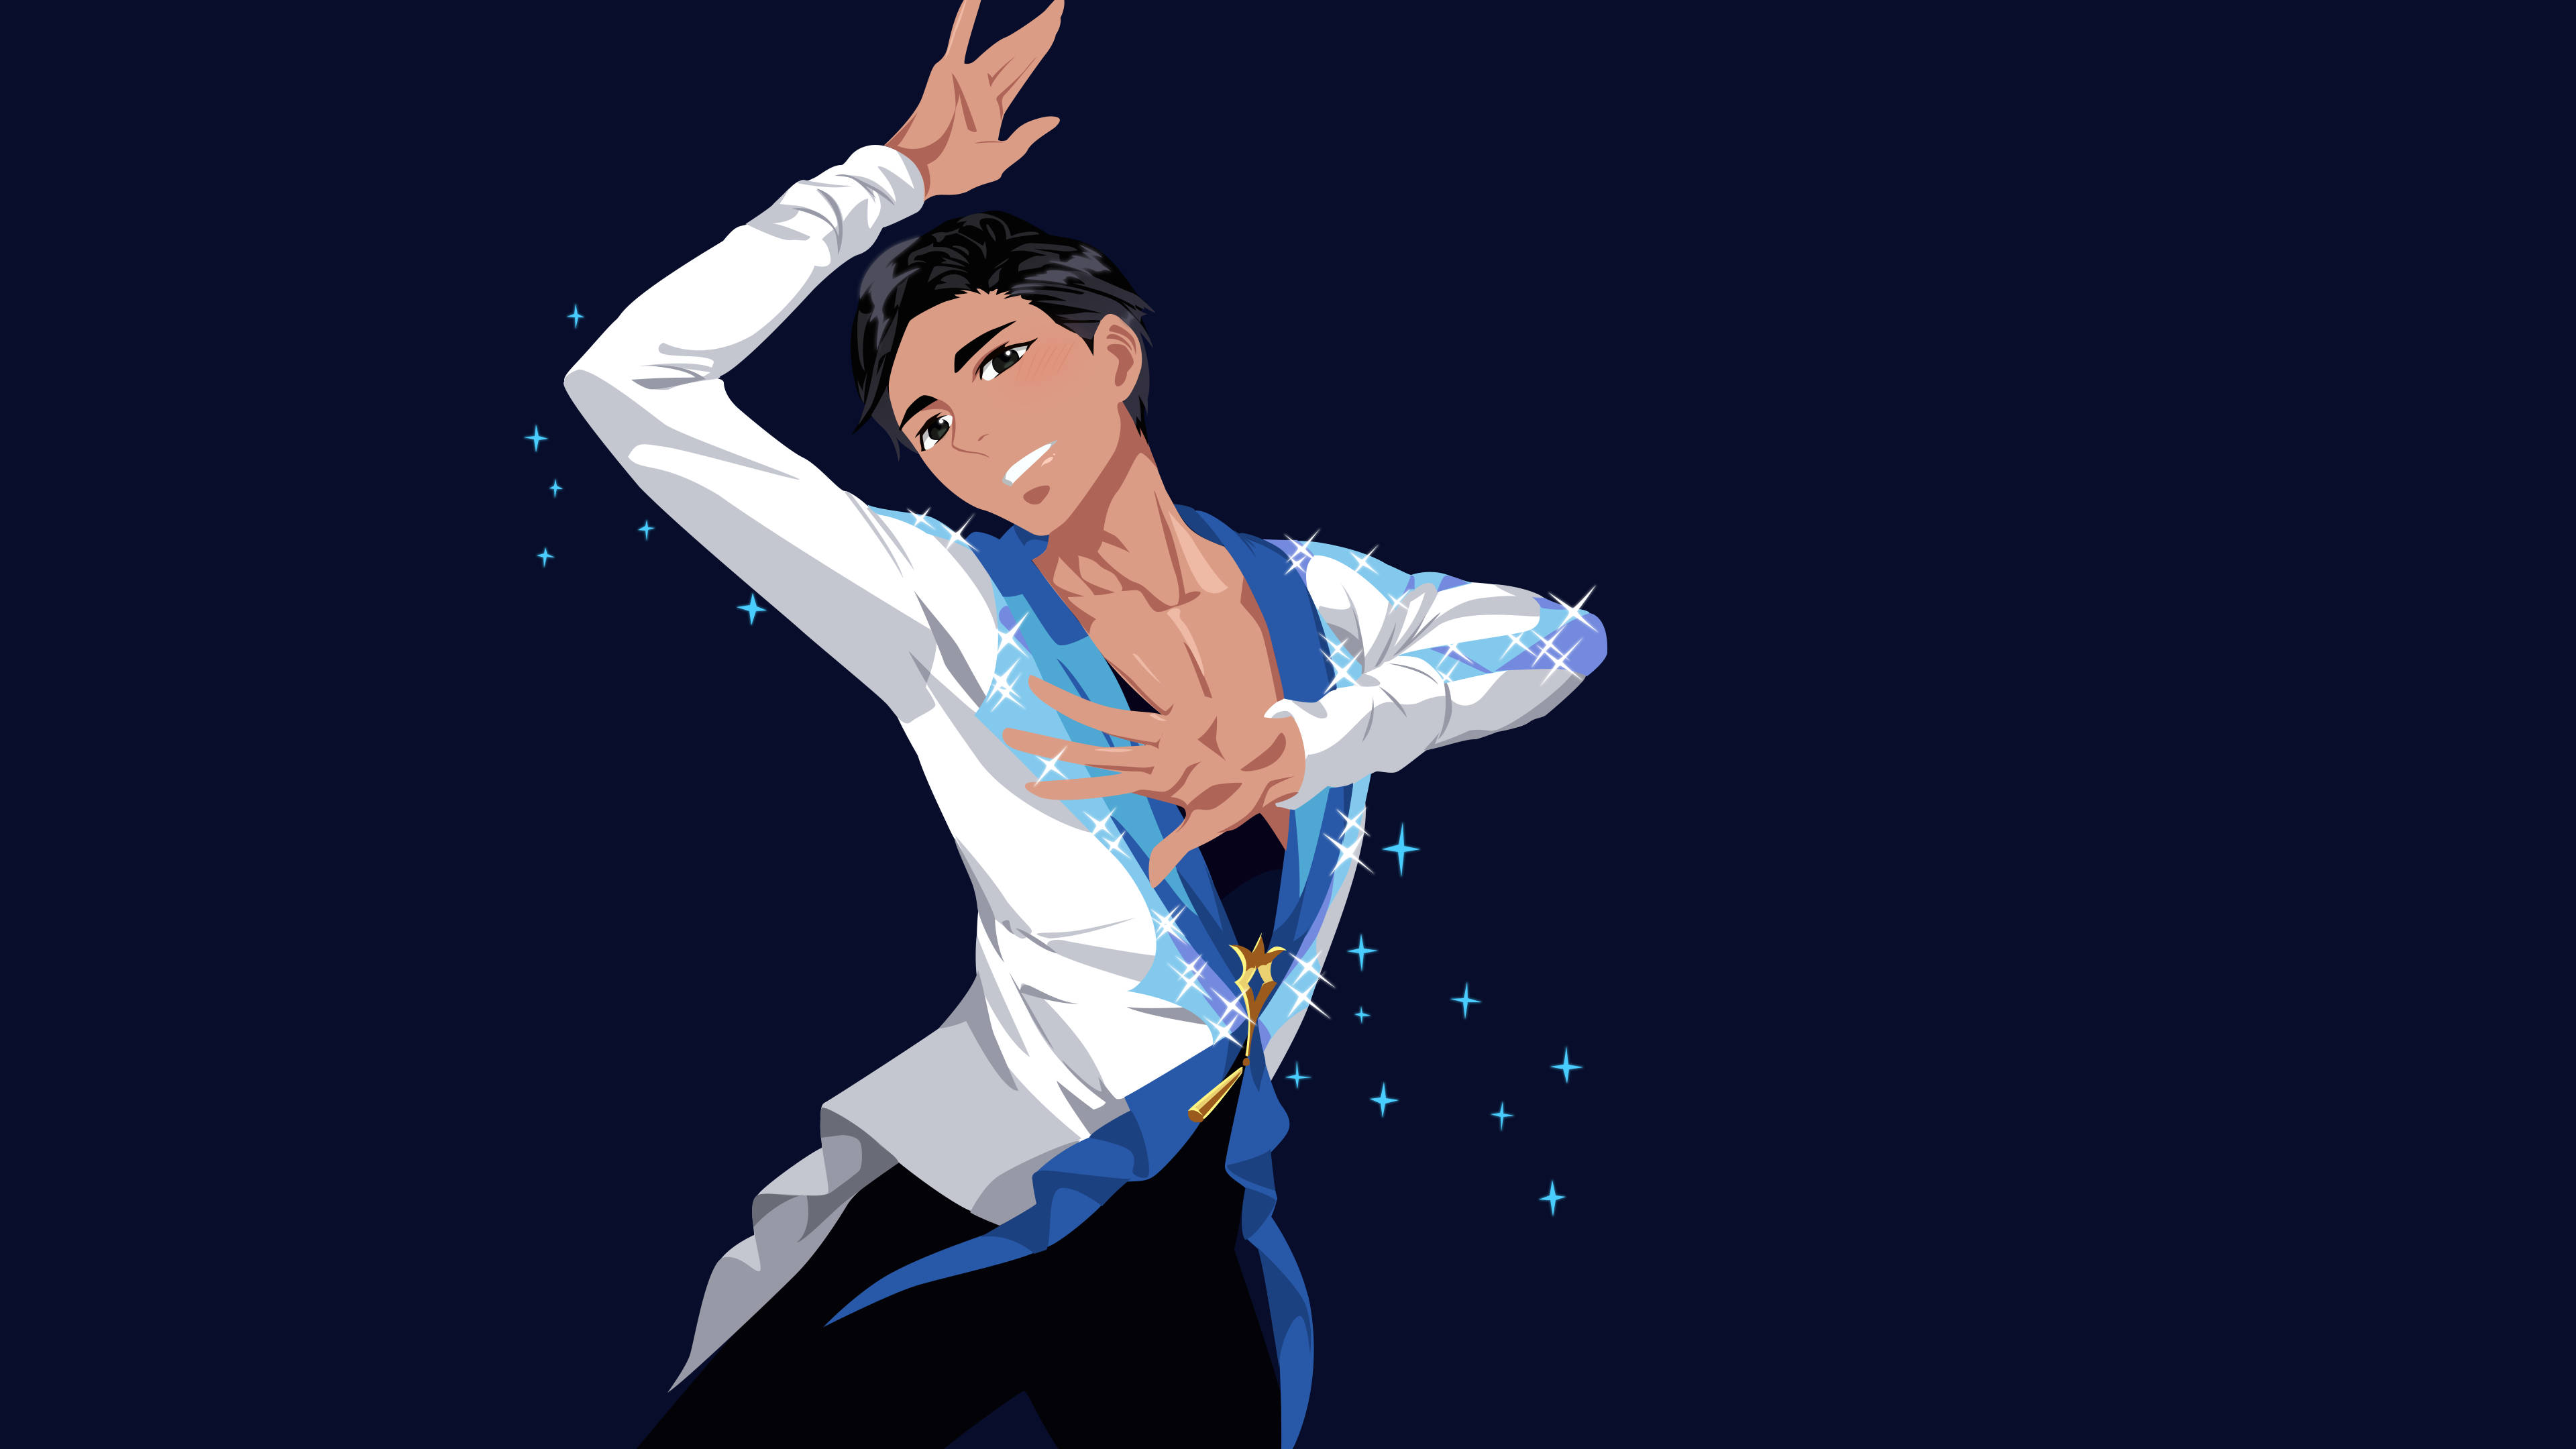 overthrow carpet . Download Yuri On Ice Phichit Chulanont Wallpaper | Wallpapers.com